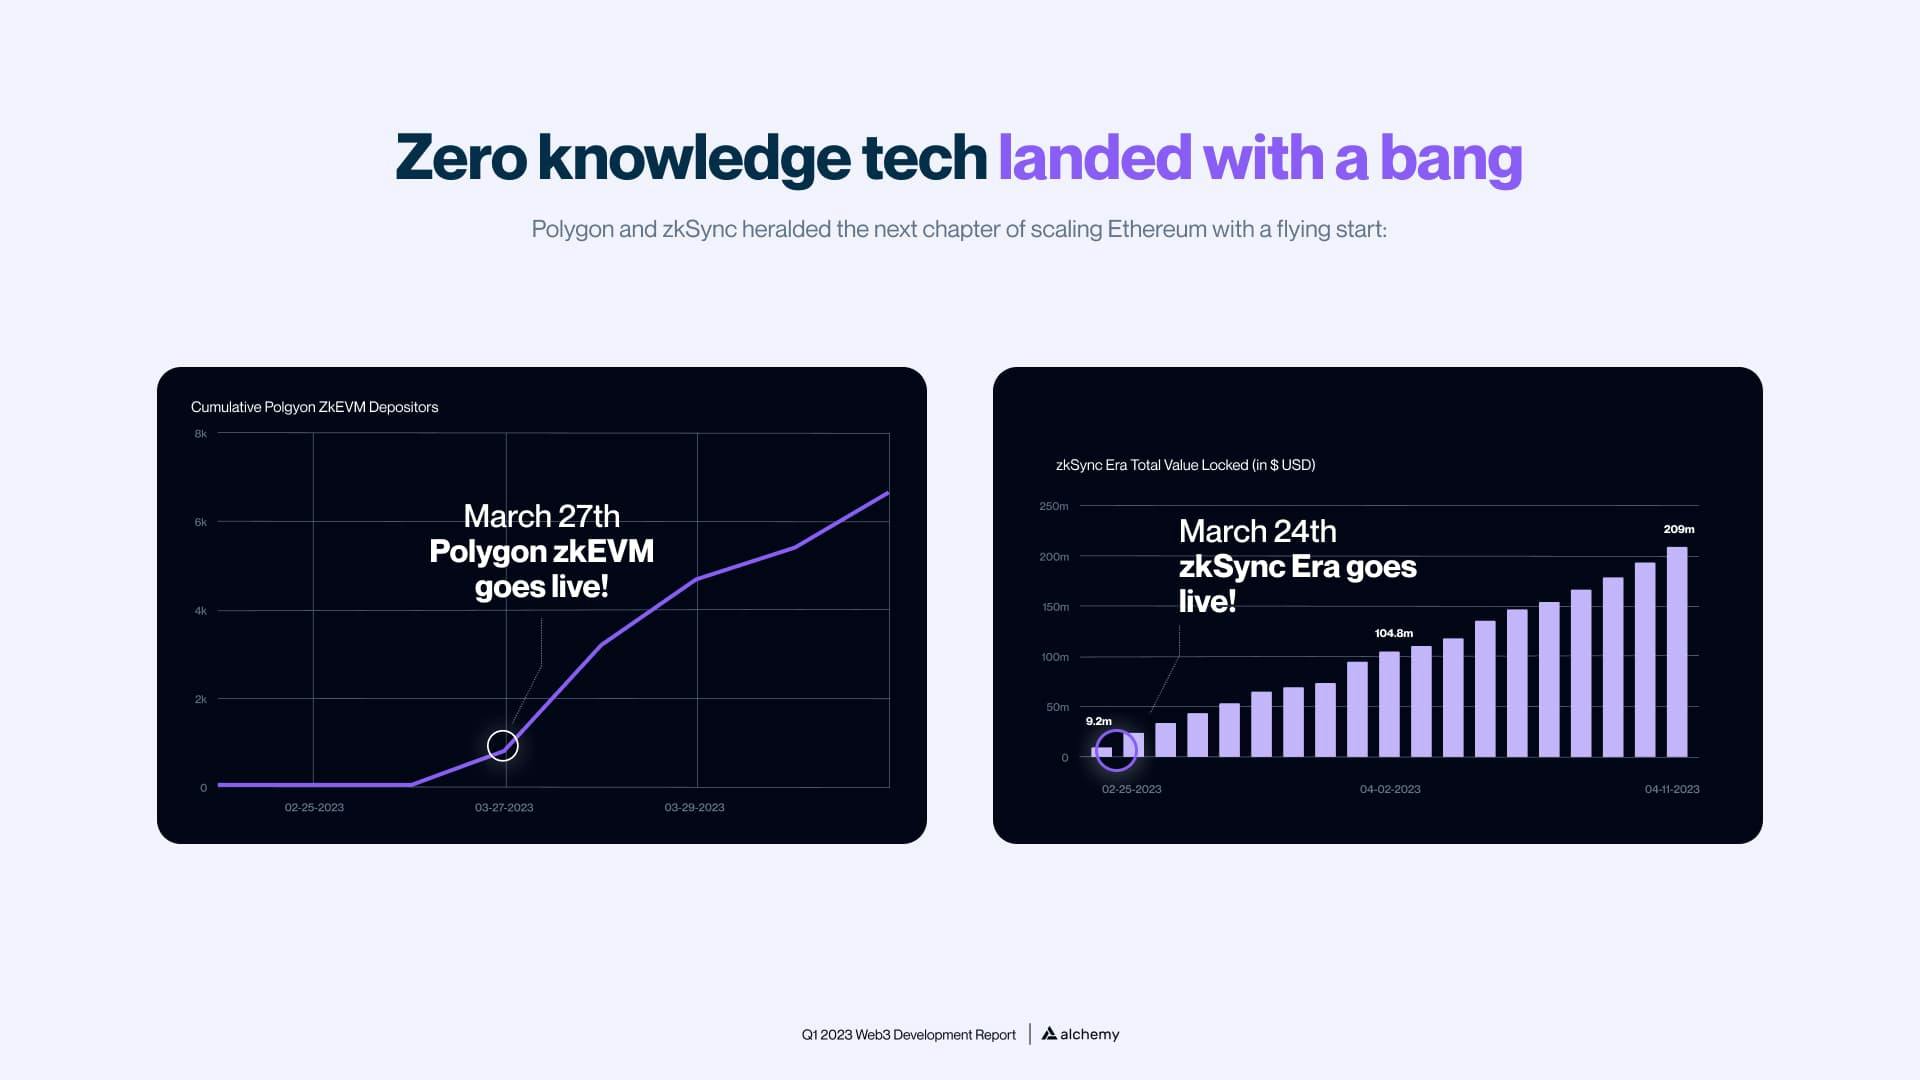 ZK rollup statistics for Polygon zkEVM depositors and zkSync Era TVL in March 2023